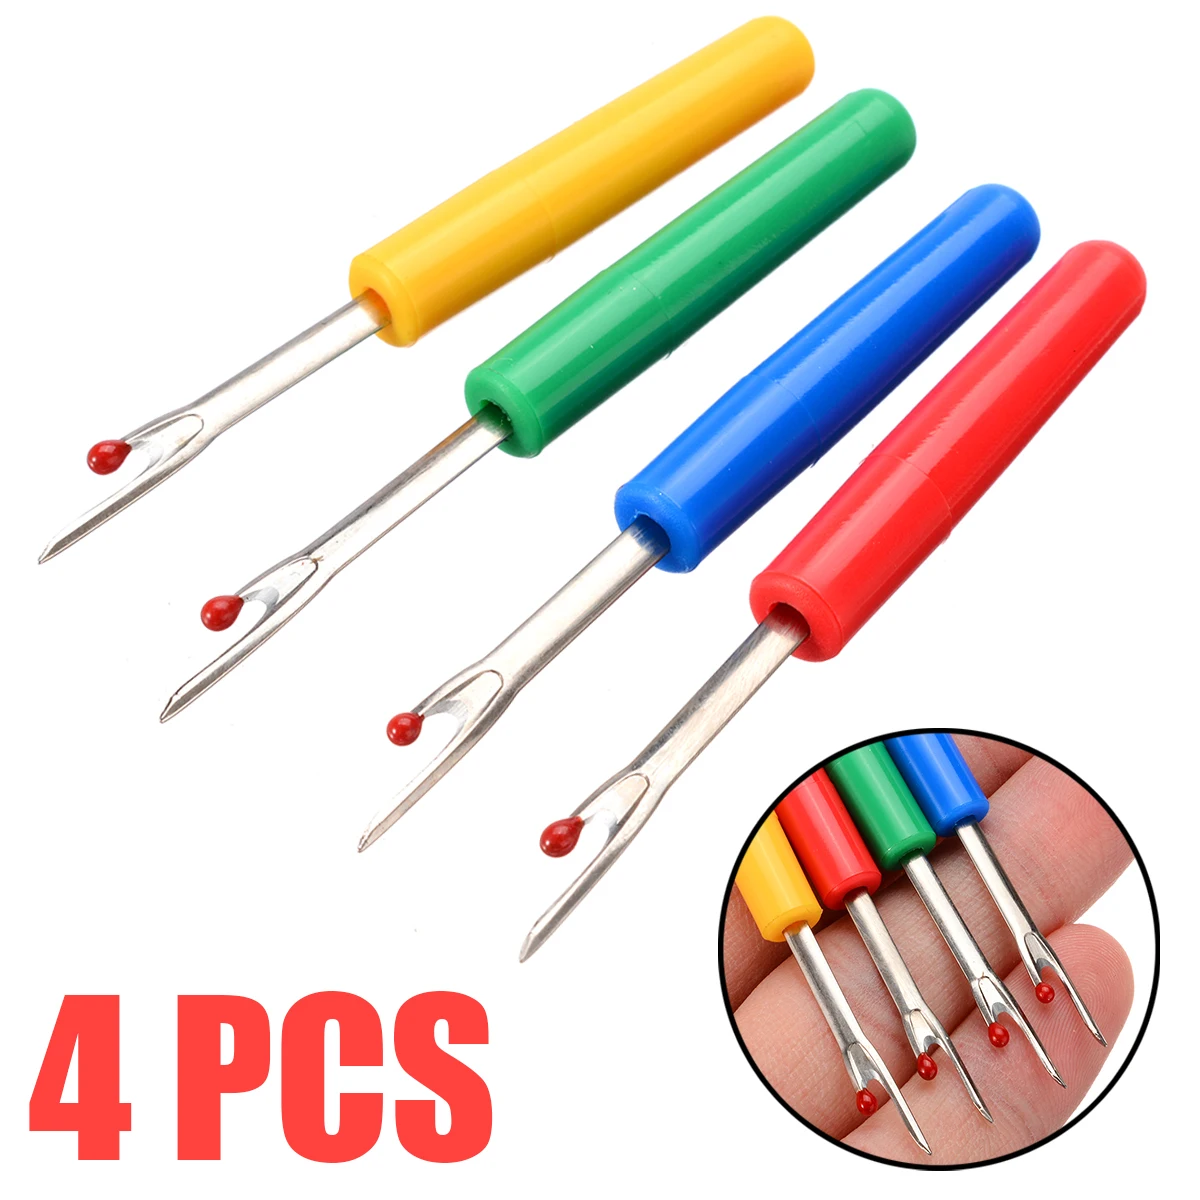 SevenMye Seam Ripper Stitch Thread Unpicker with Plastic Handle and Cover for Sewing and Crafting 16 Pieces Assorted Colors 